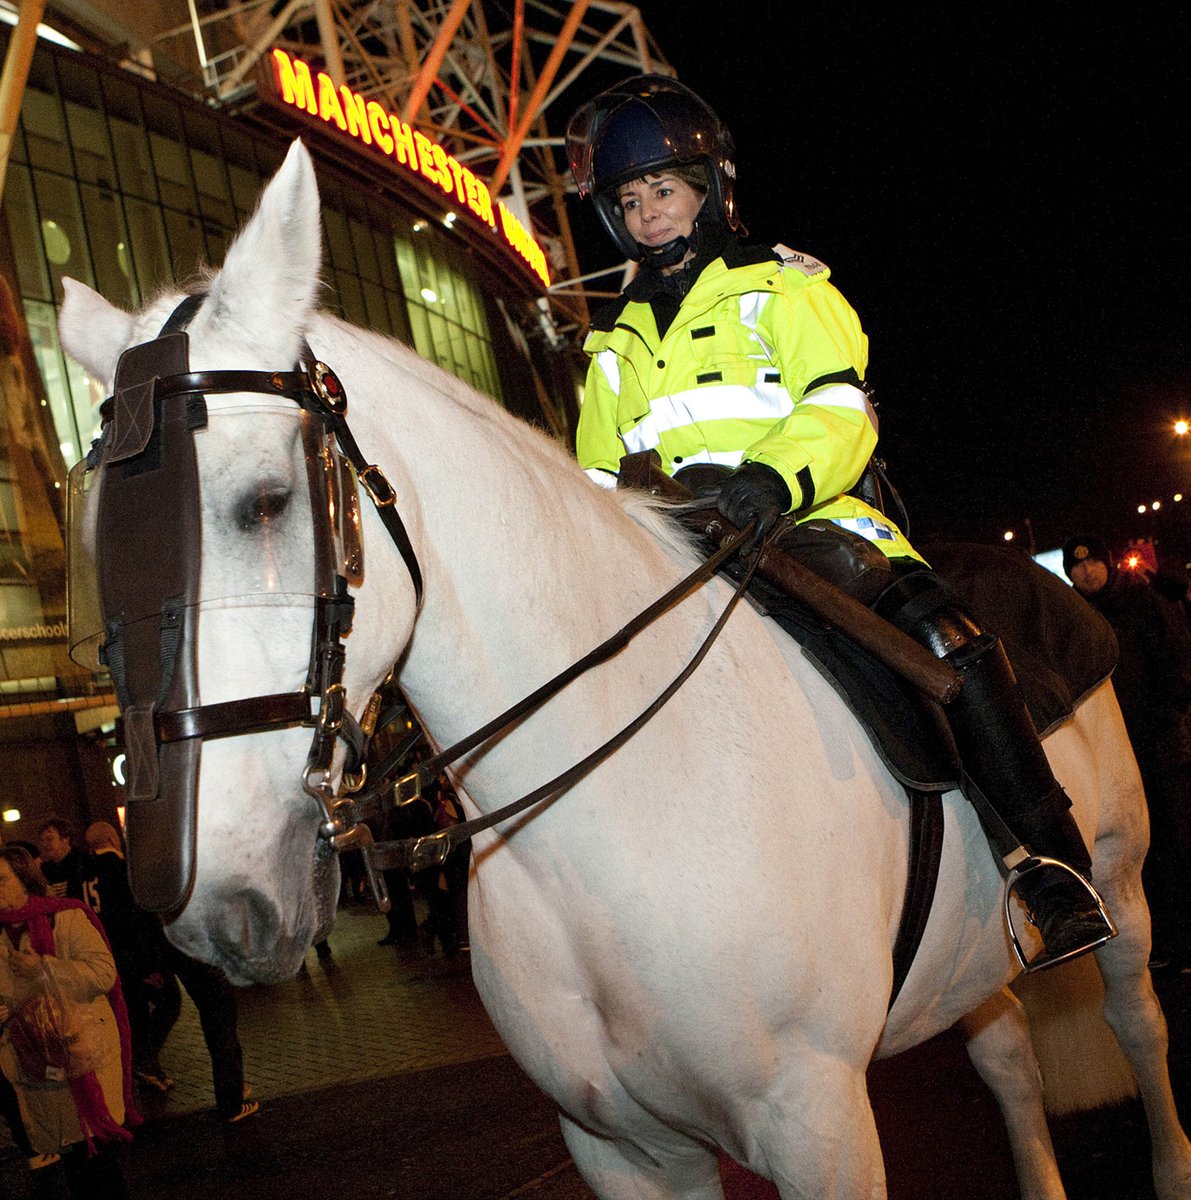 #GMP50 | An officer from GMP’s Tactical Mounted Branch stand outside Old Trafford prior to the Carling Cup semi-final between Manchester United and Manchester City in 2010. #TBT #ThrowbackThursday